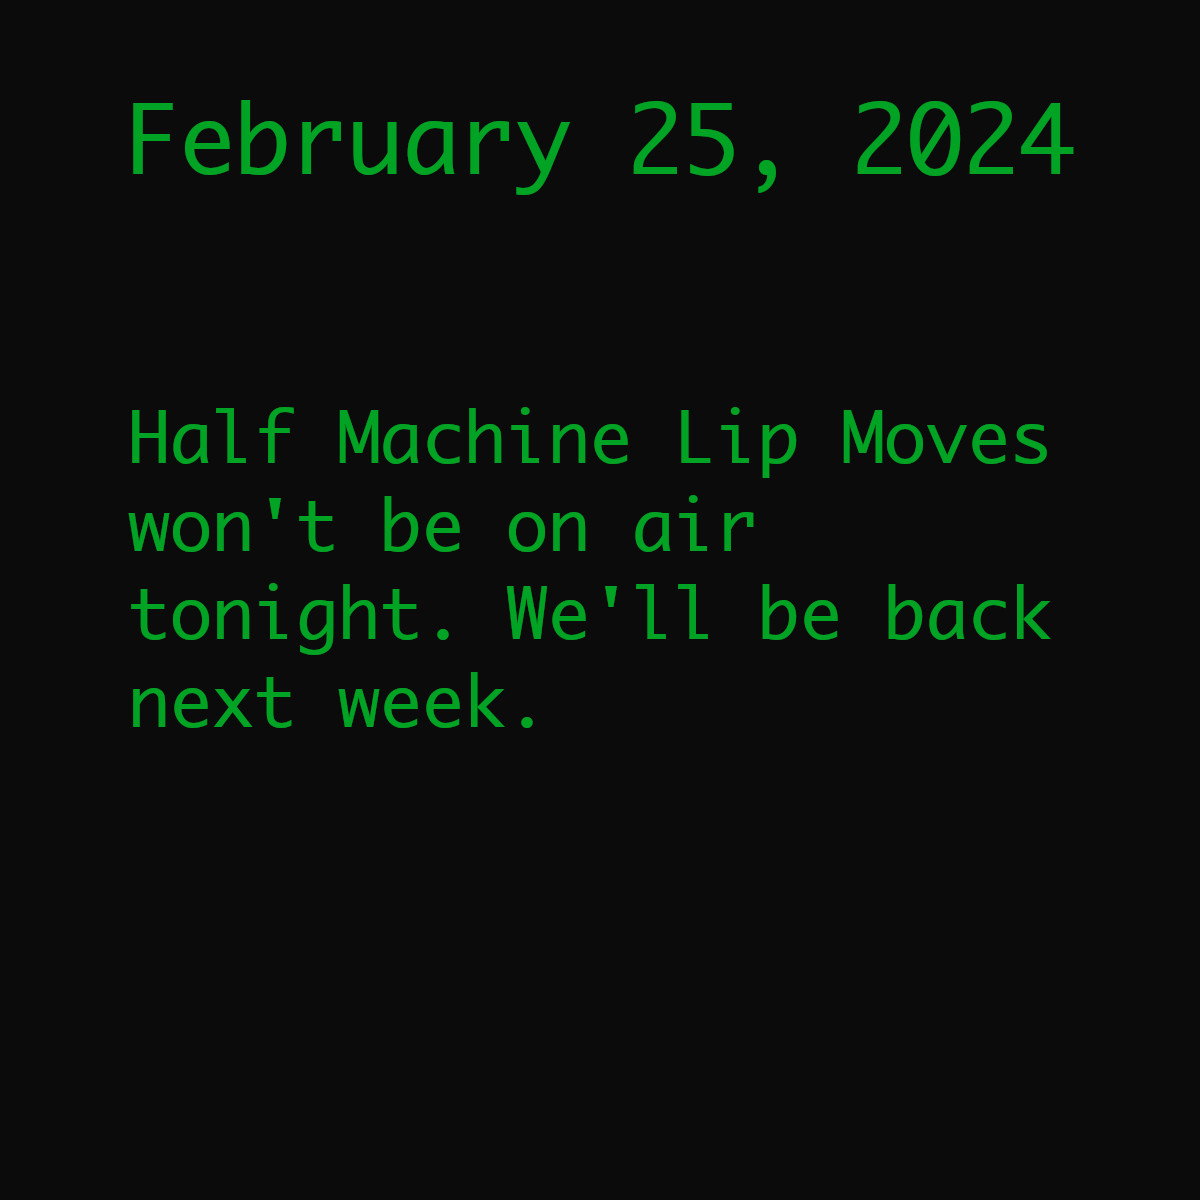 The image is a black box with green monospace text. The text reads, &ldquo;February 25, 2024. Half Machine Lip Moves won&rsquo;t be on air this week. We&rsquo;ll be back next week with a new episode.&rdquo;